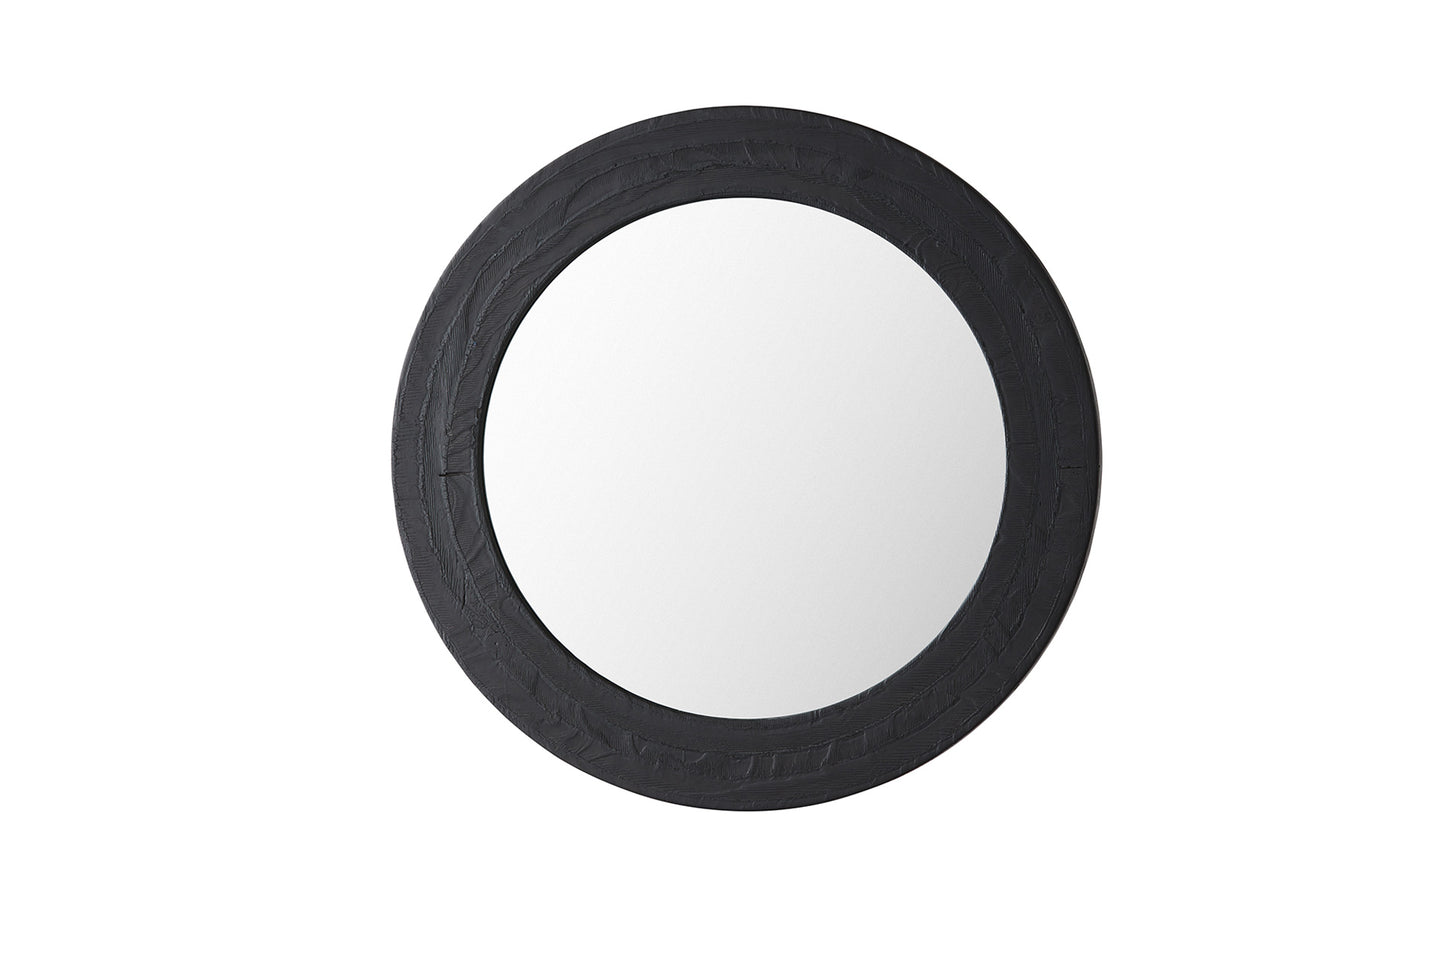 Scorched Circular Ply Mirror Small